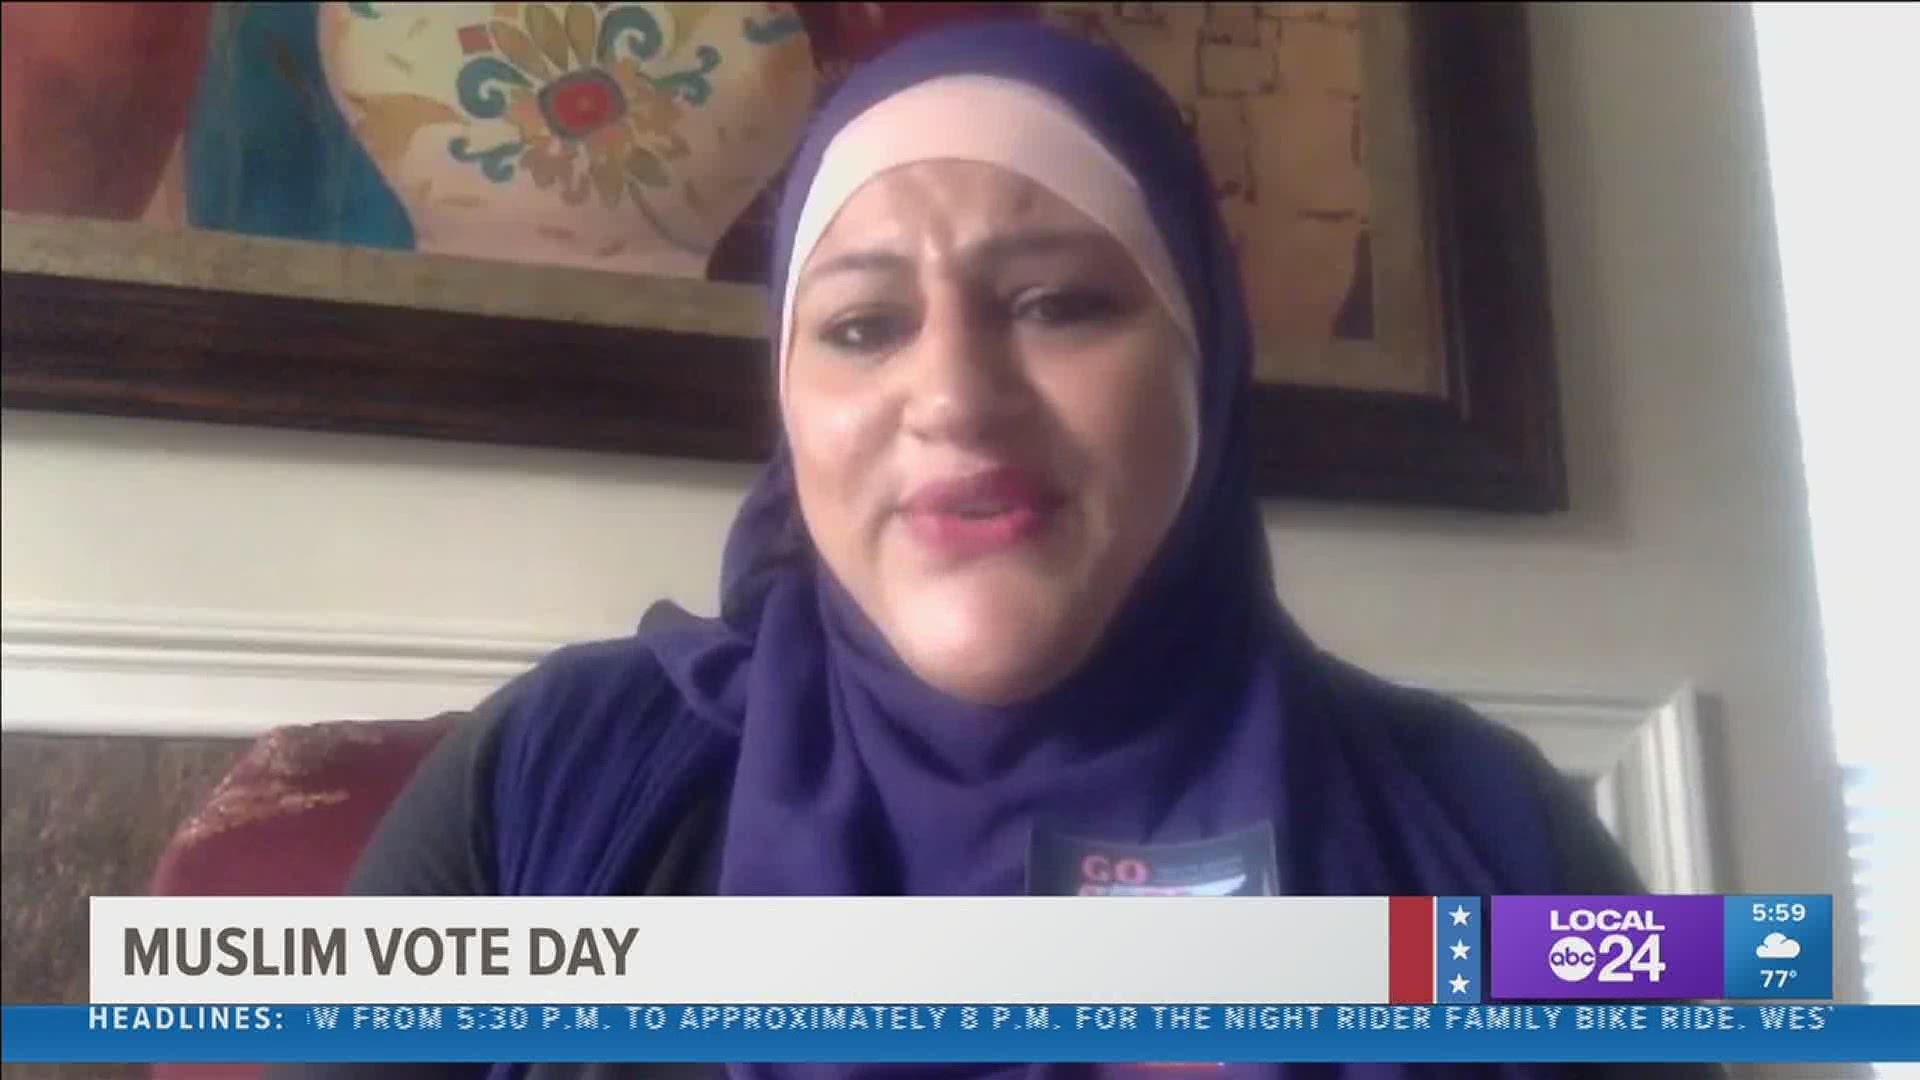 In a state-wide event, members of the Muslim community were encouraged to head to the polls ahead of the November election.